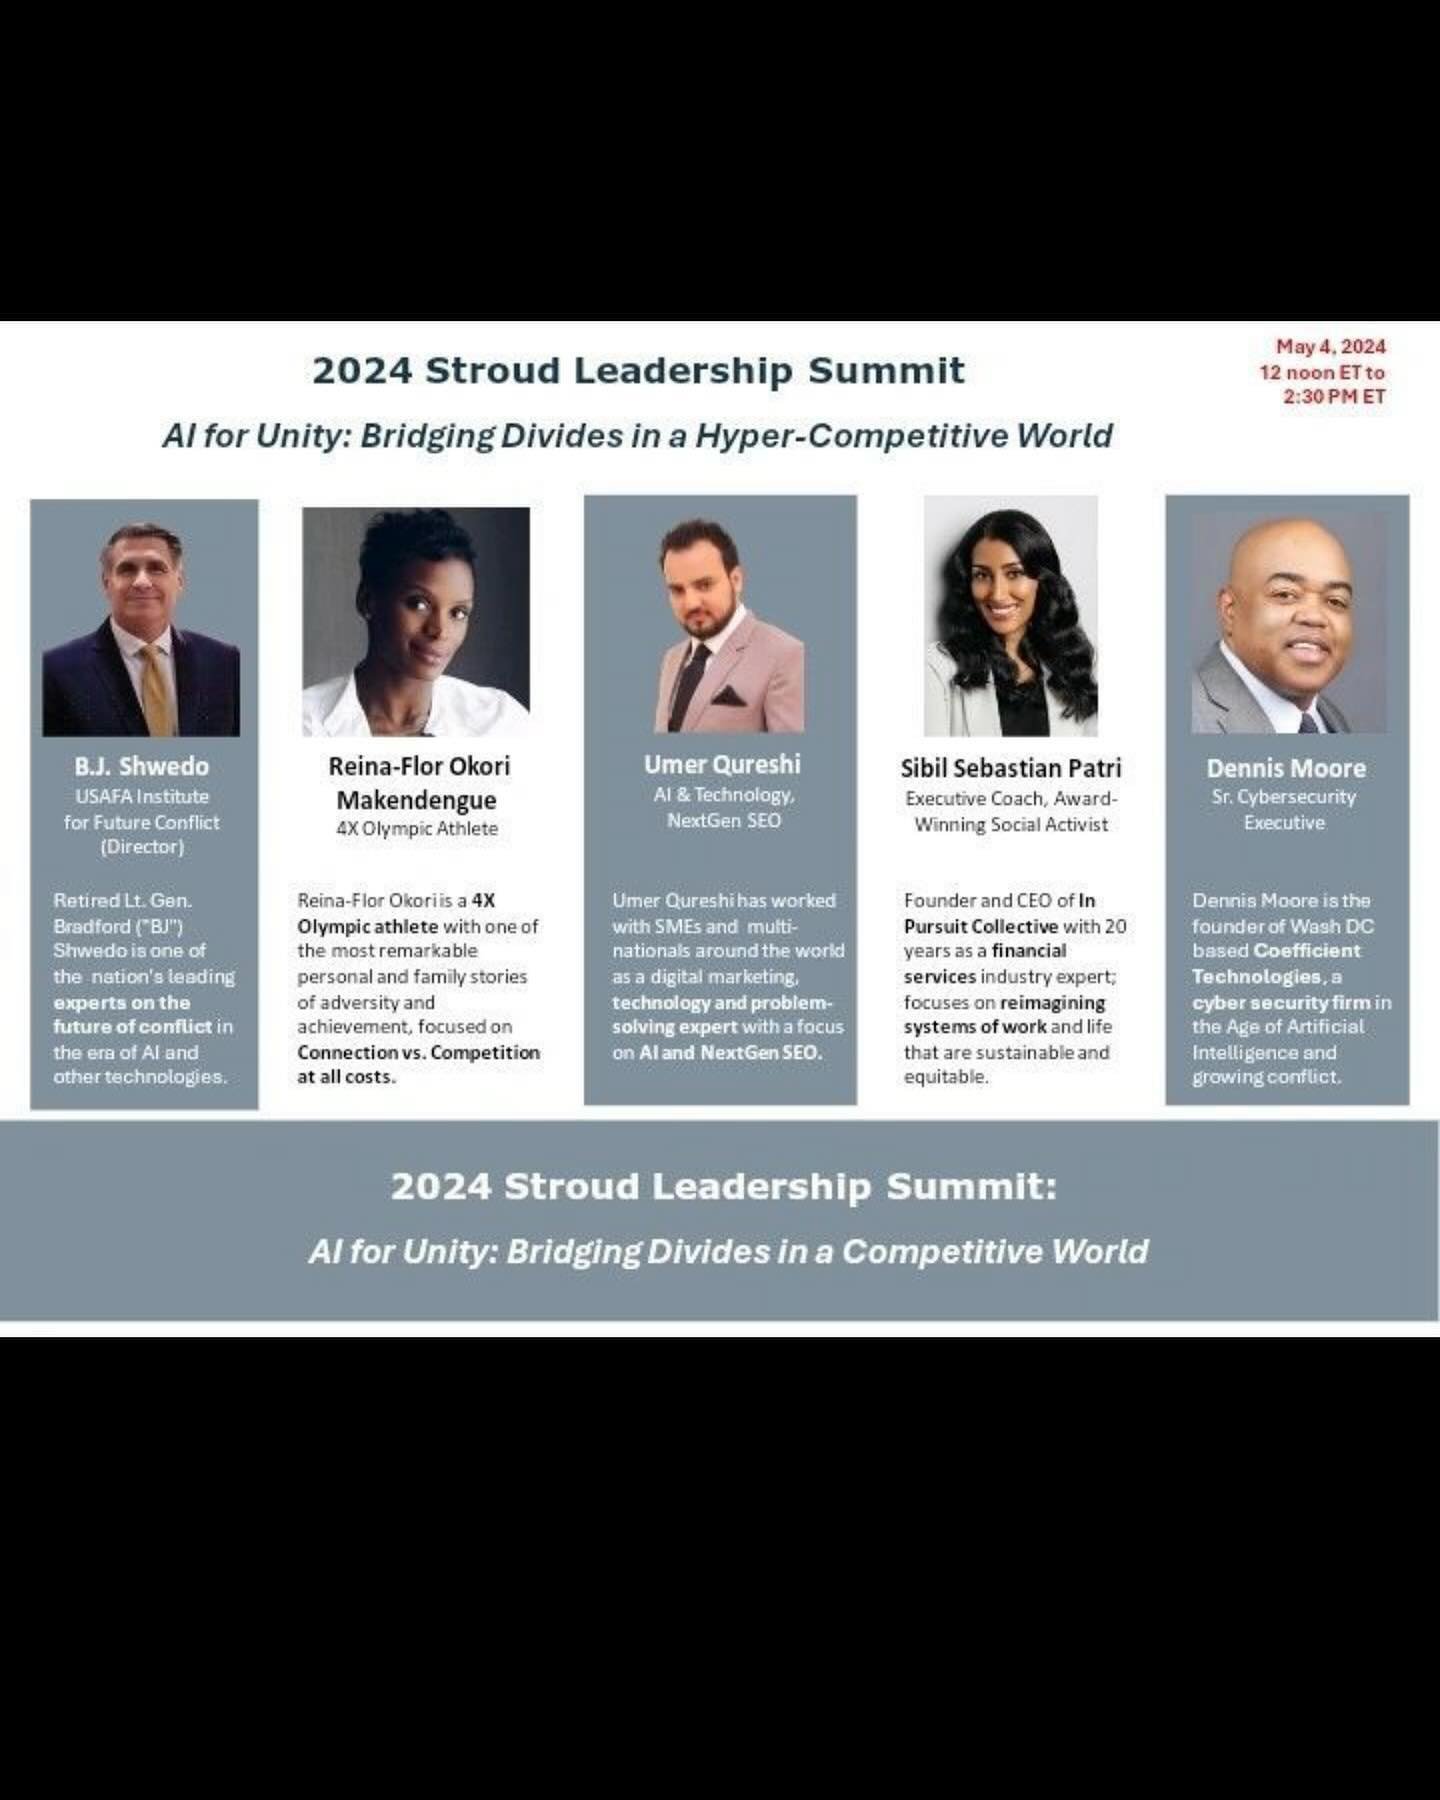 I am speaking at the Stroud Leadership Summit today; to discuss A.I. for Unity. 🙏🏽

Bottom line of my discussion: Women of color need to be overrepresented in A.I. for us to combat racial bias that is already showing up.

FRANK SHINES loved hearing